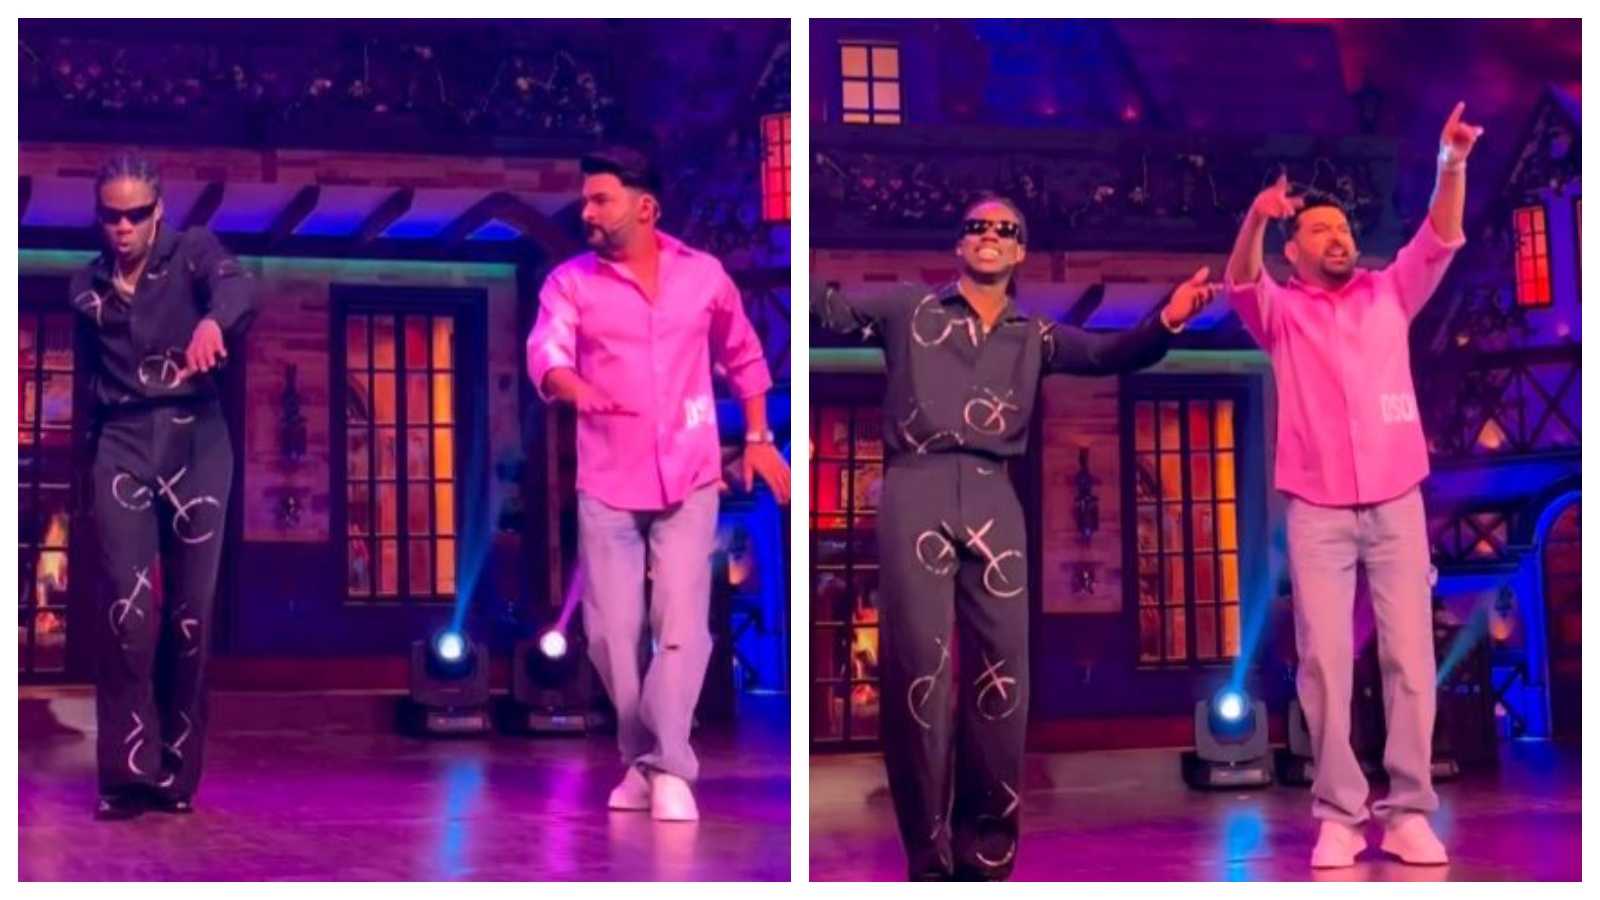 Kapil Sharma and singer Rema perform the iconic step of Calm Down song, netizens react